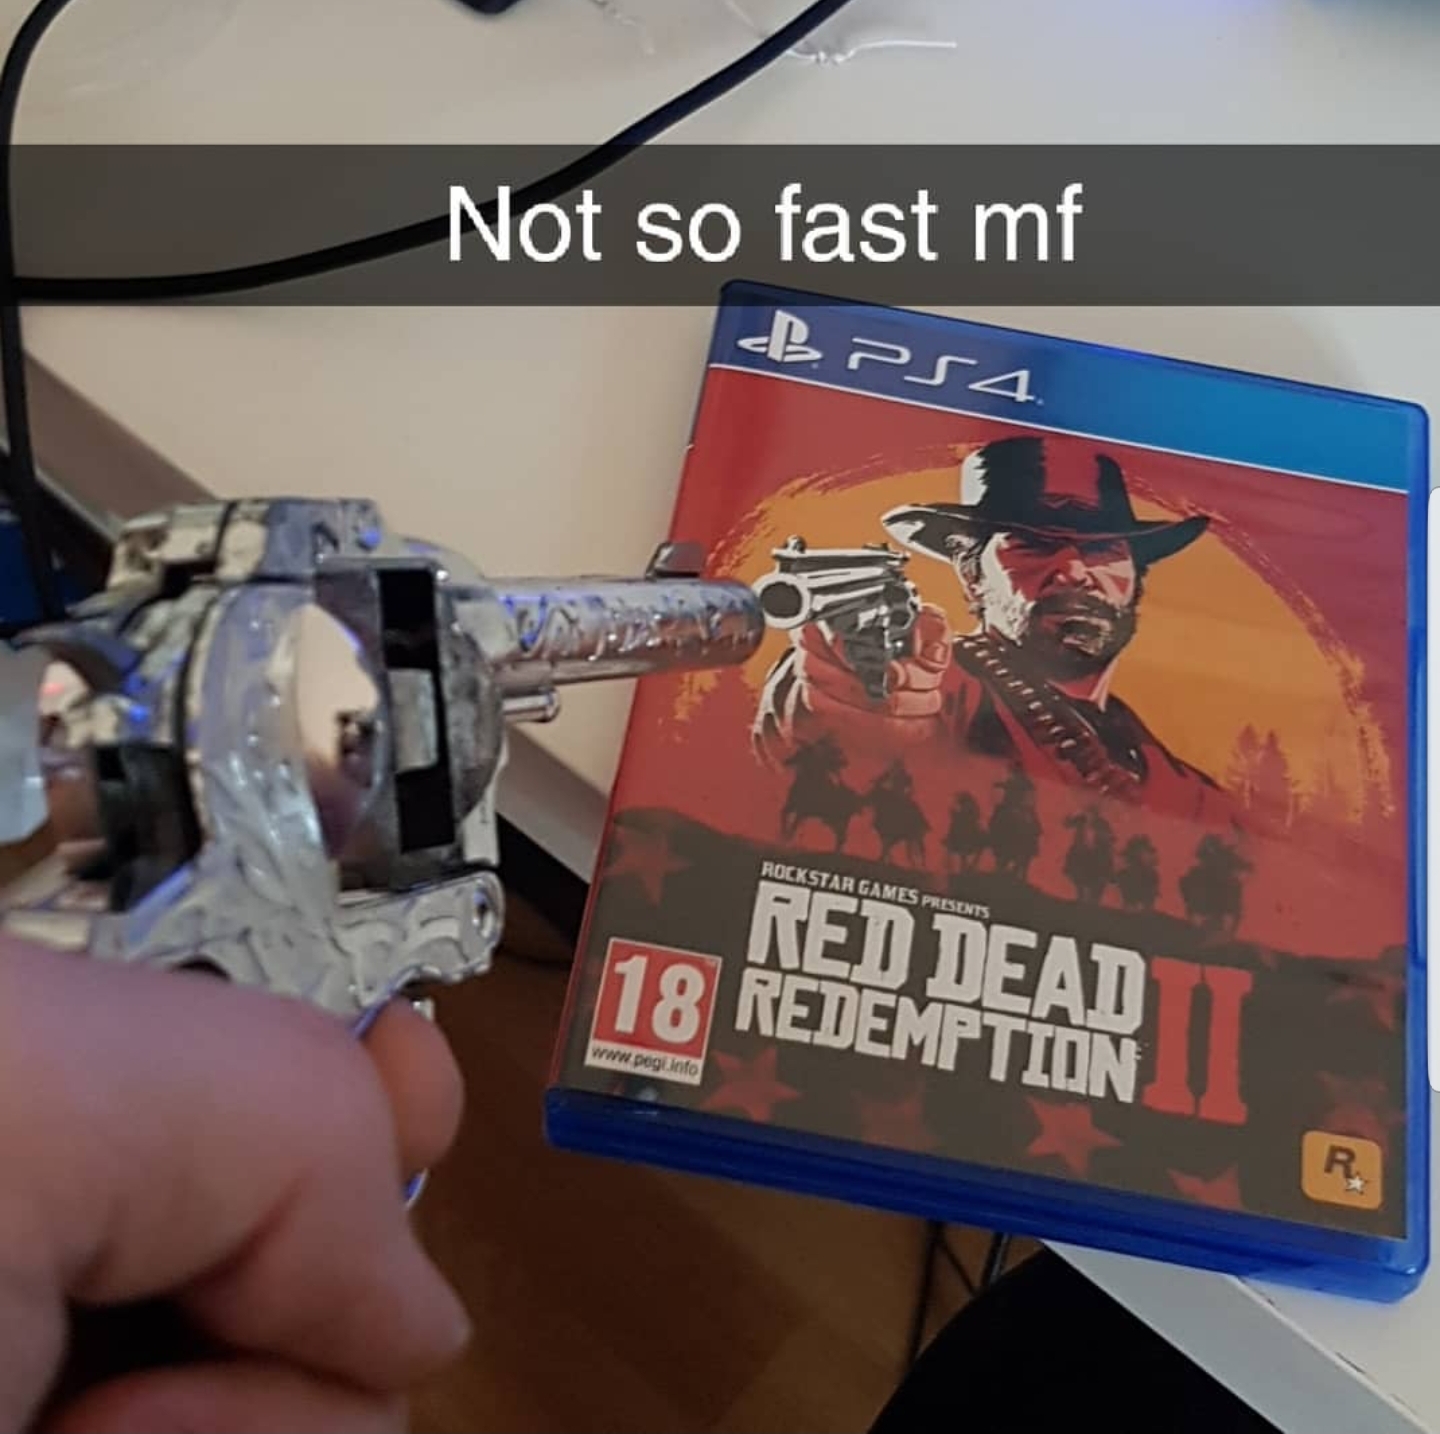 not so fast mf red dead redemption meme - Not so fast mf BPsa Red Deal 18 Redemptan